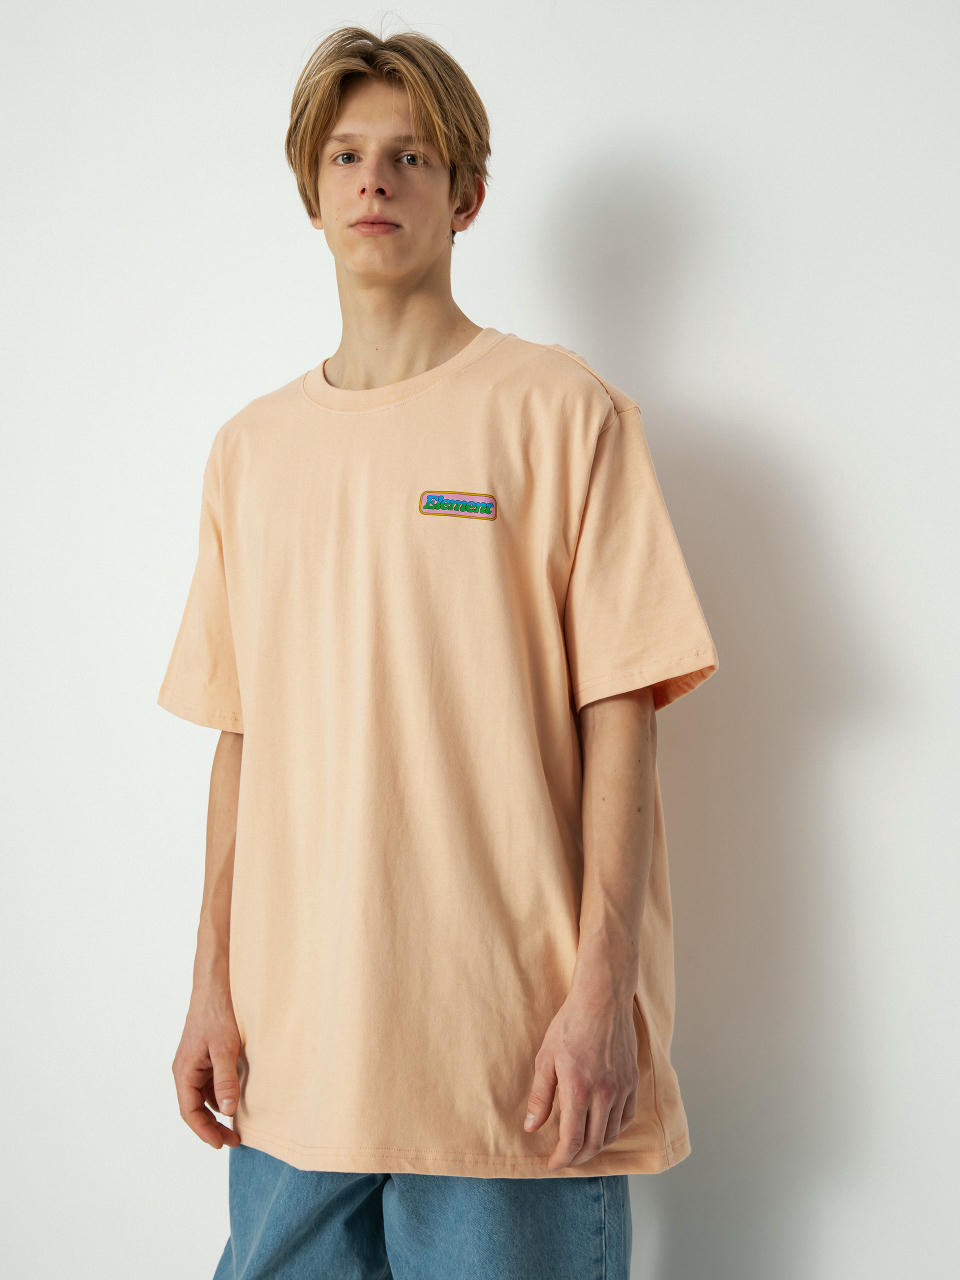 Element Reflections T-shirt (almost apricot)